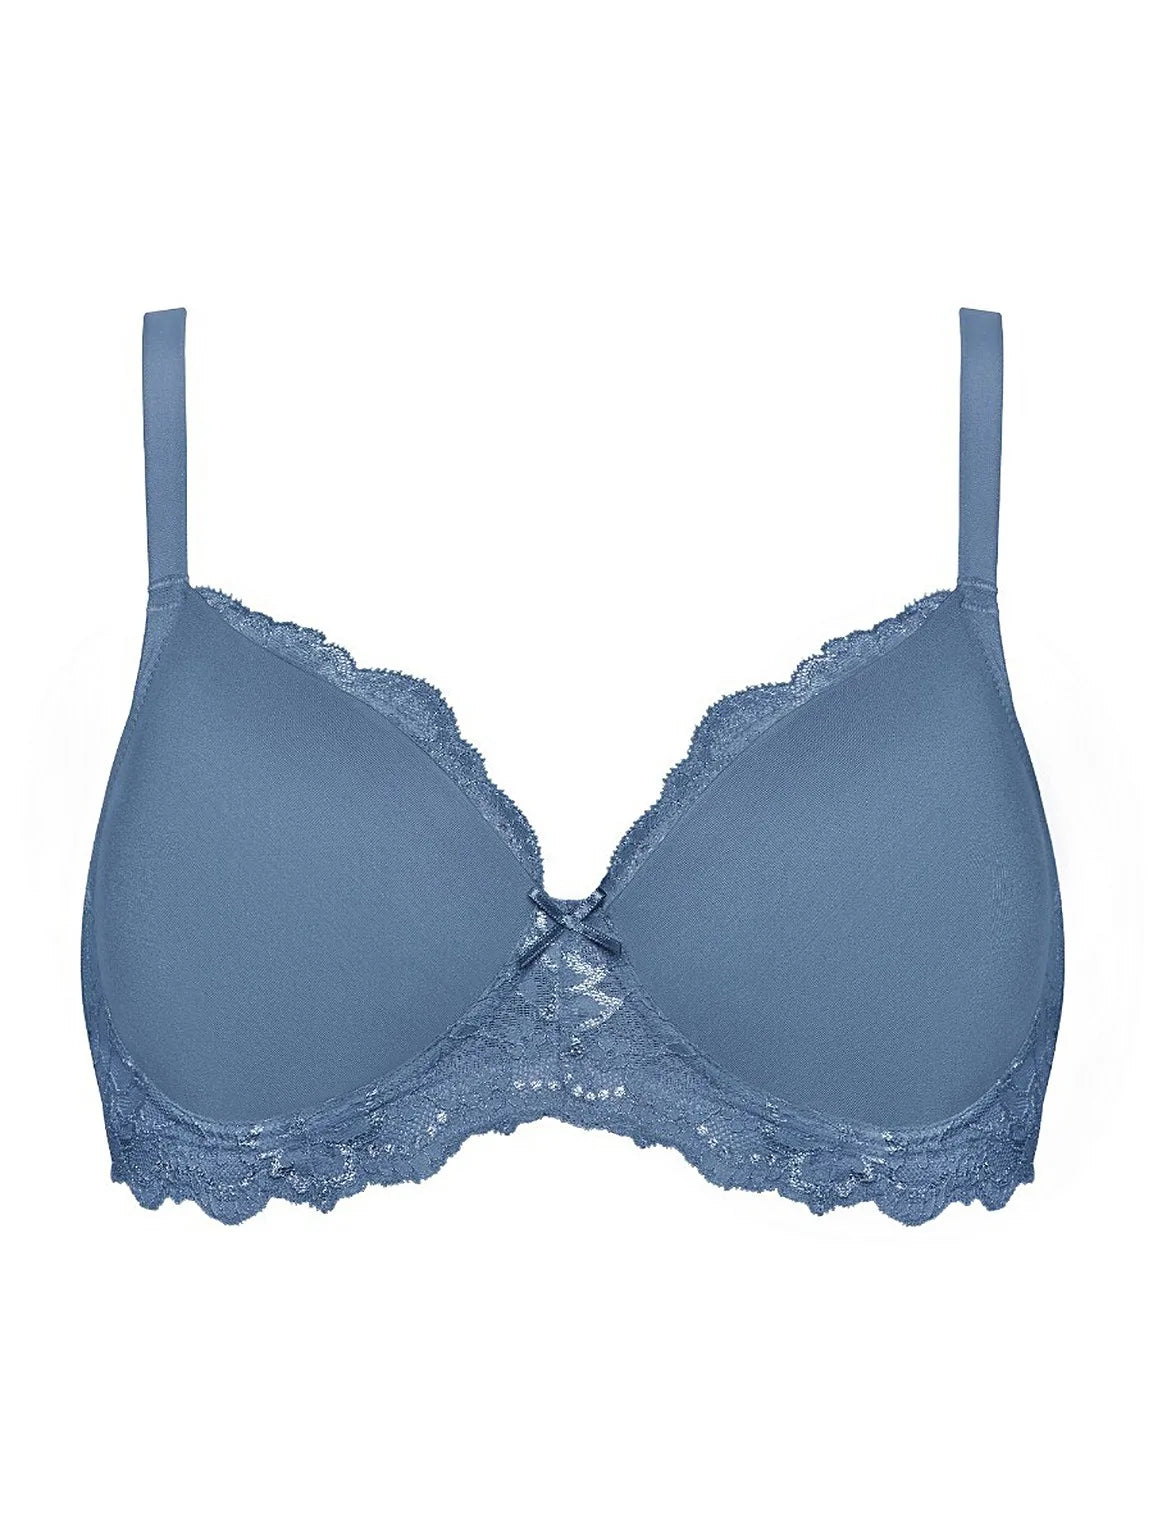 Indie soft cup molded bra at Belle Lacet Lingerie